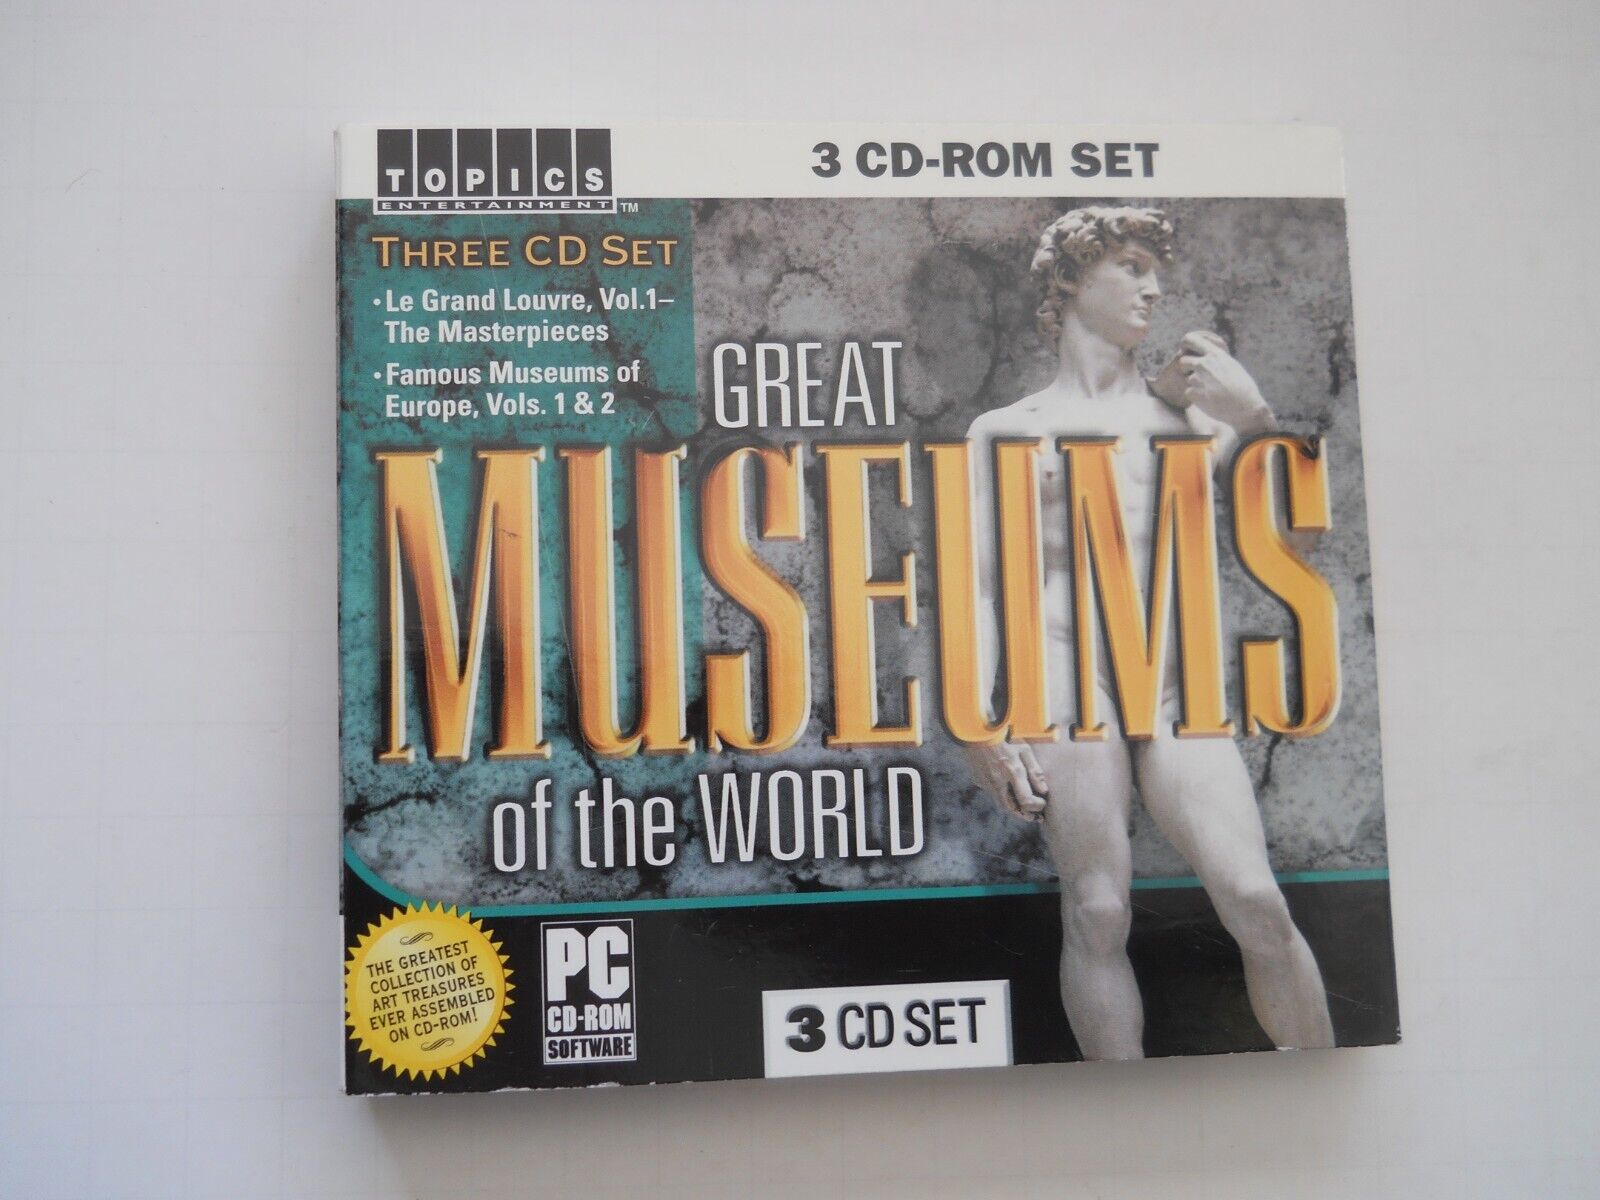 GREAT MUSEUMS OF THE WORLD 3 CD ROM SET